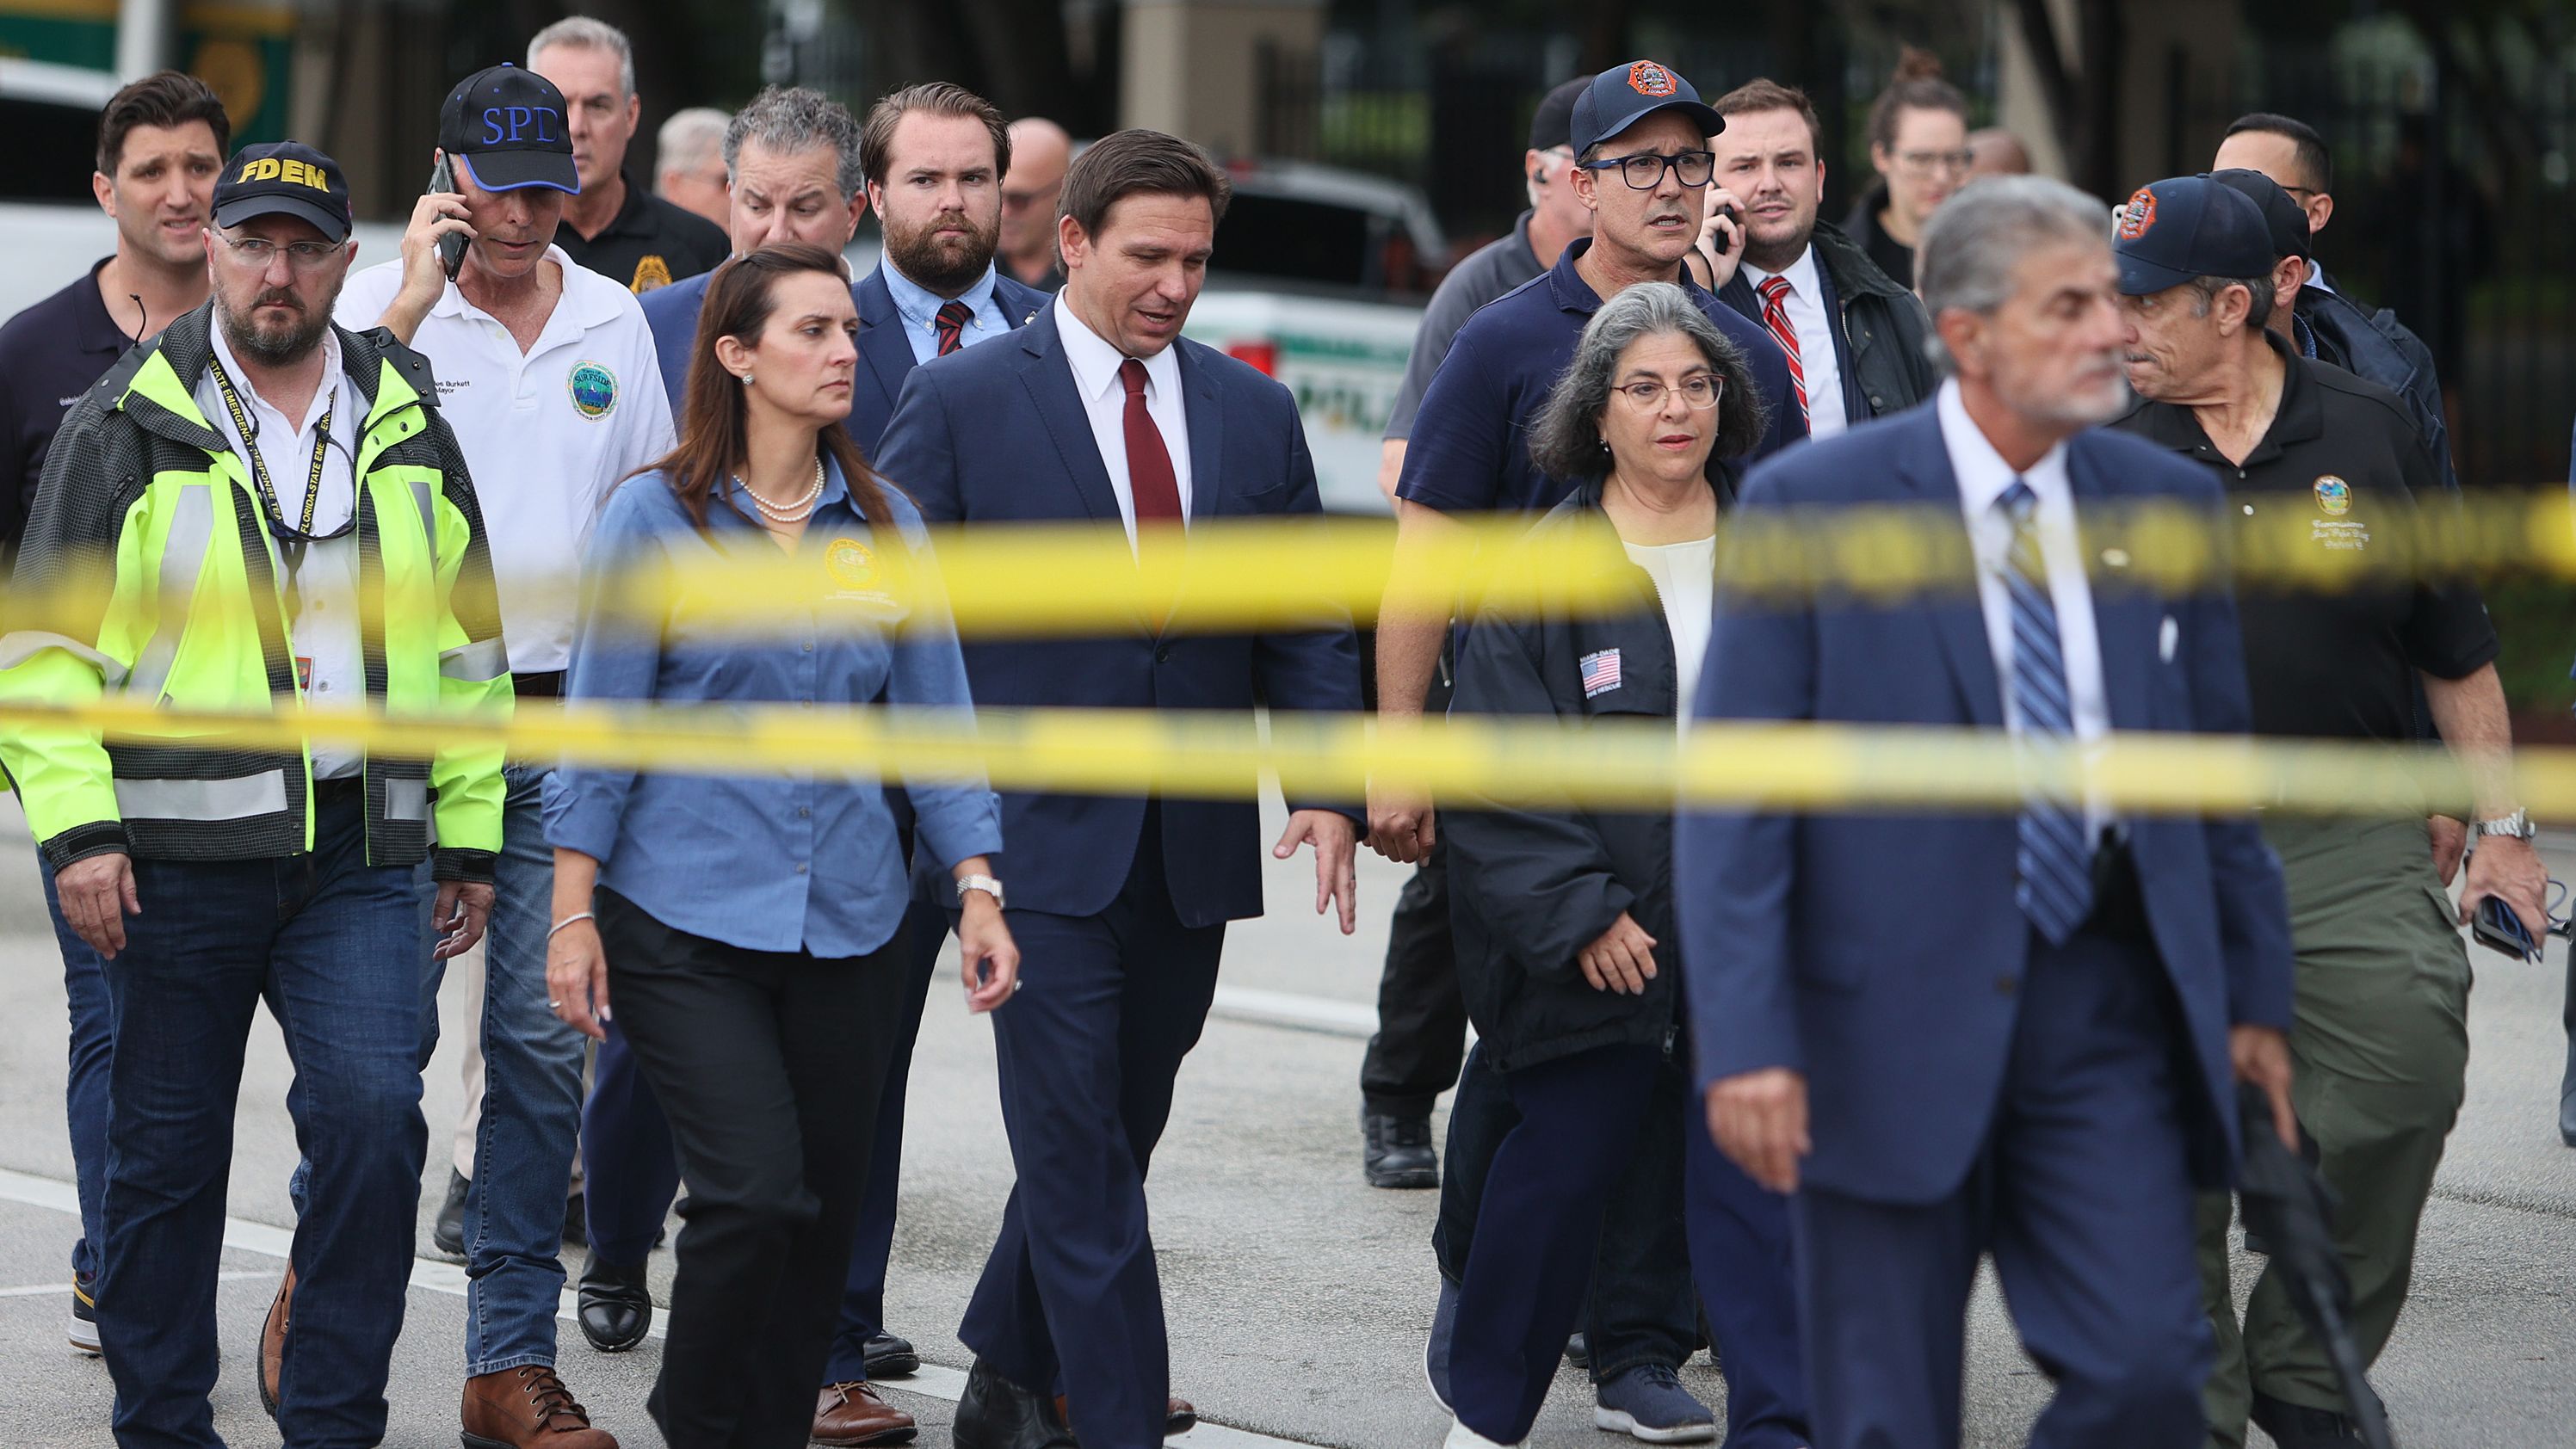 Florida Gov. Ron DeSantis, at center in the red tie, arrives to speak to the media on June 24. "We still have hope to be able to identify additional survivors," DeSantis told reporters near the scene. "The state of Florida, we're offering any assistance that we can."